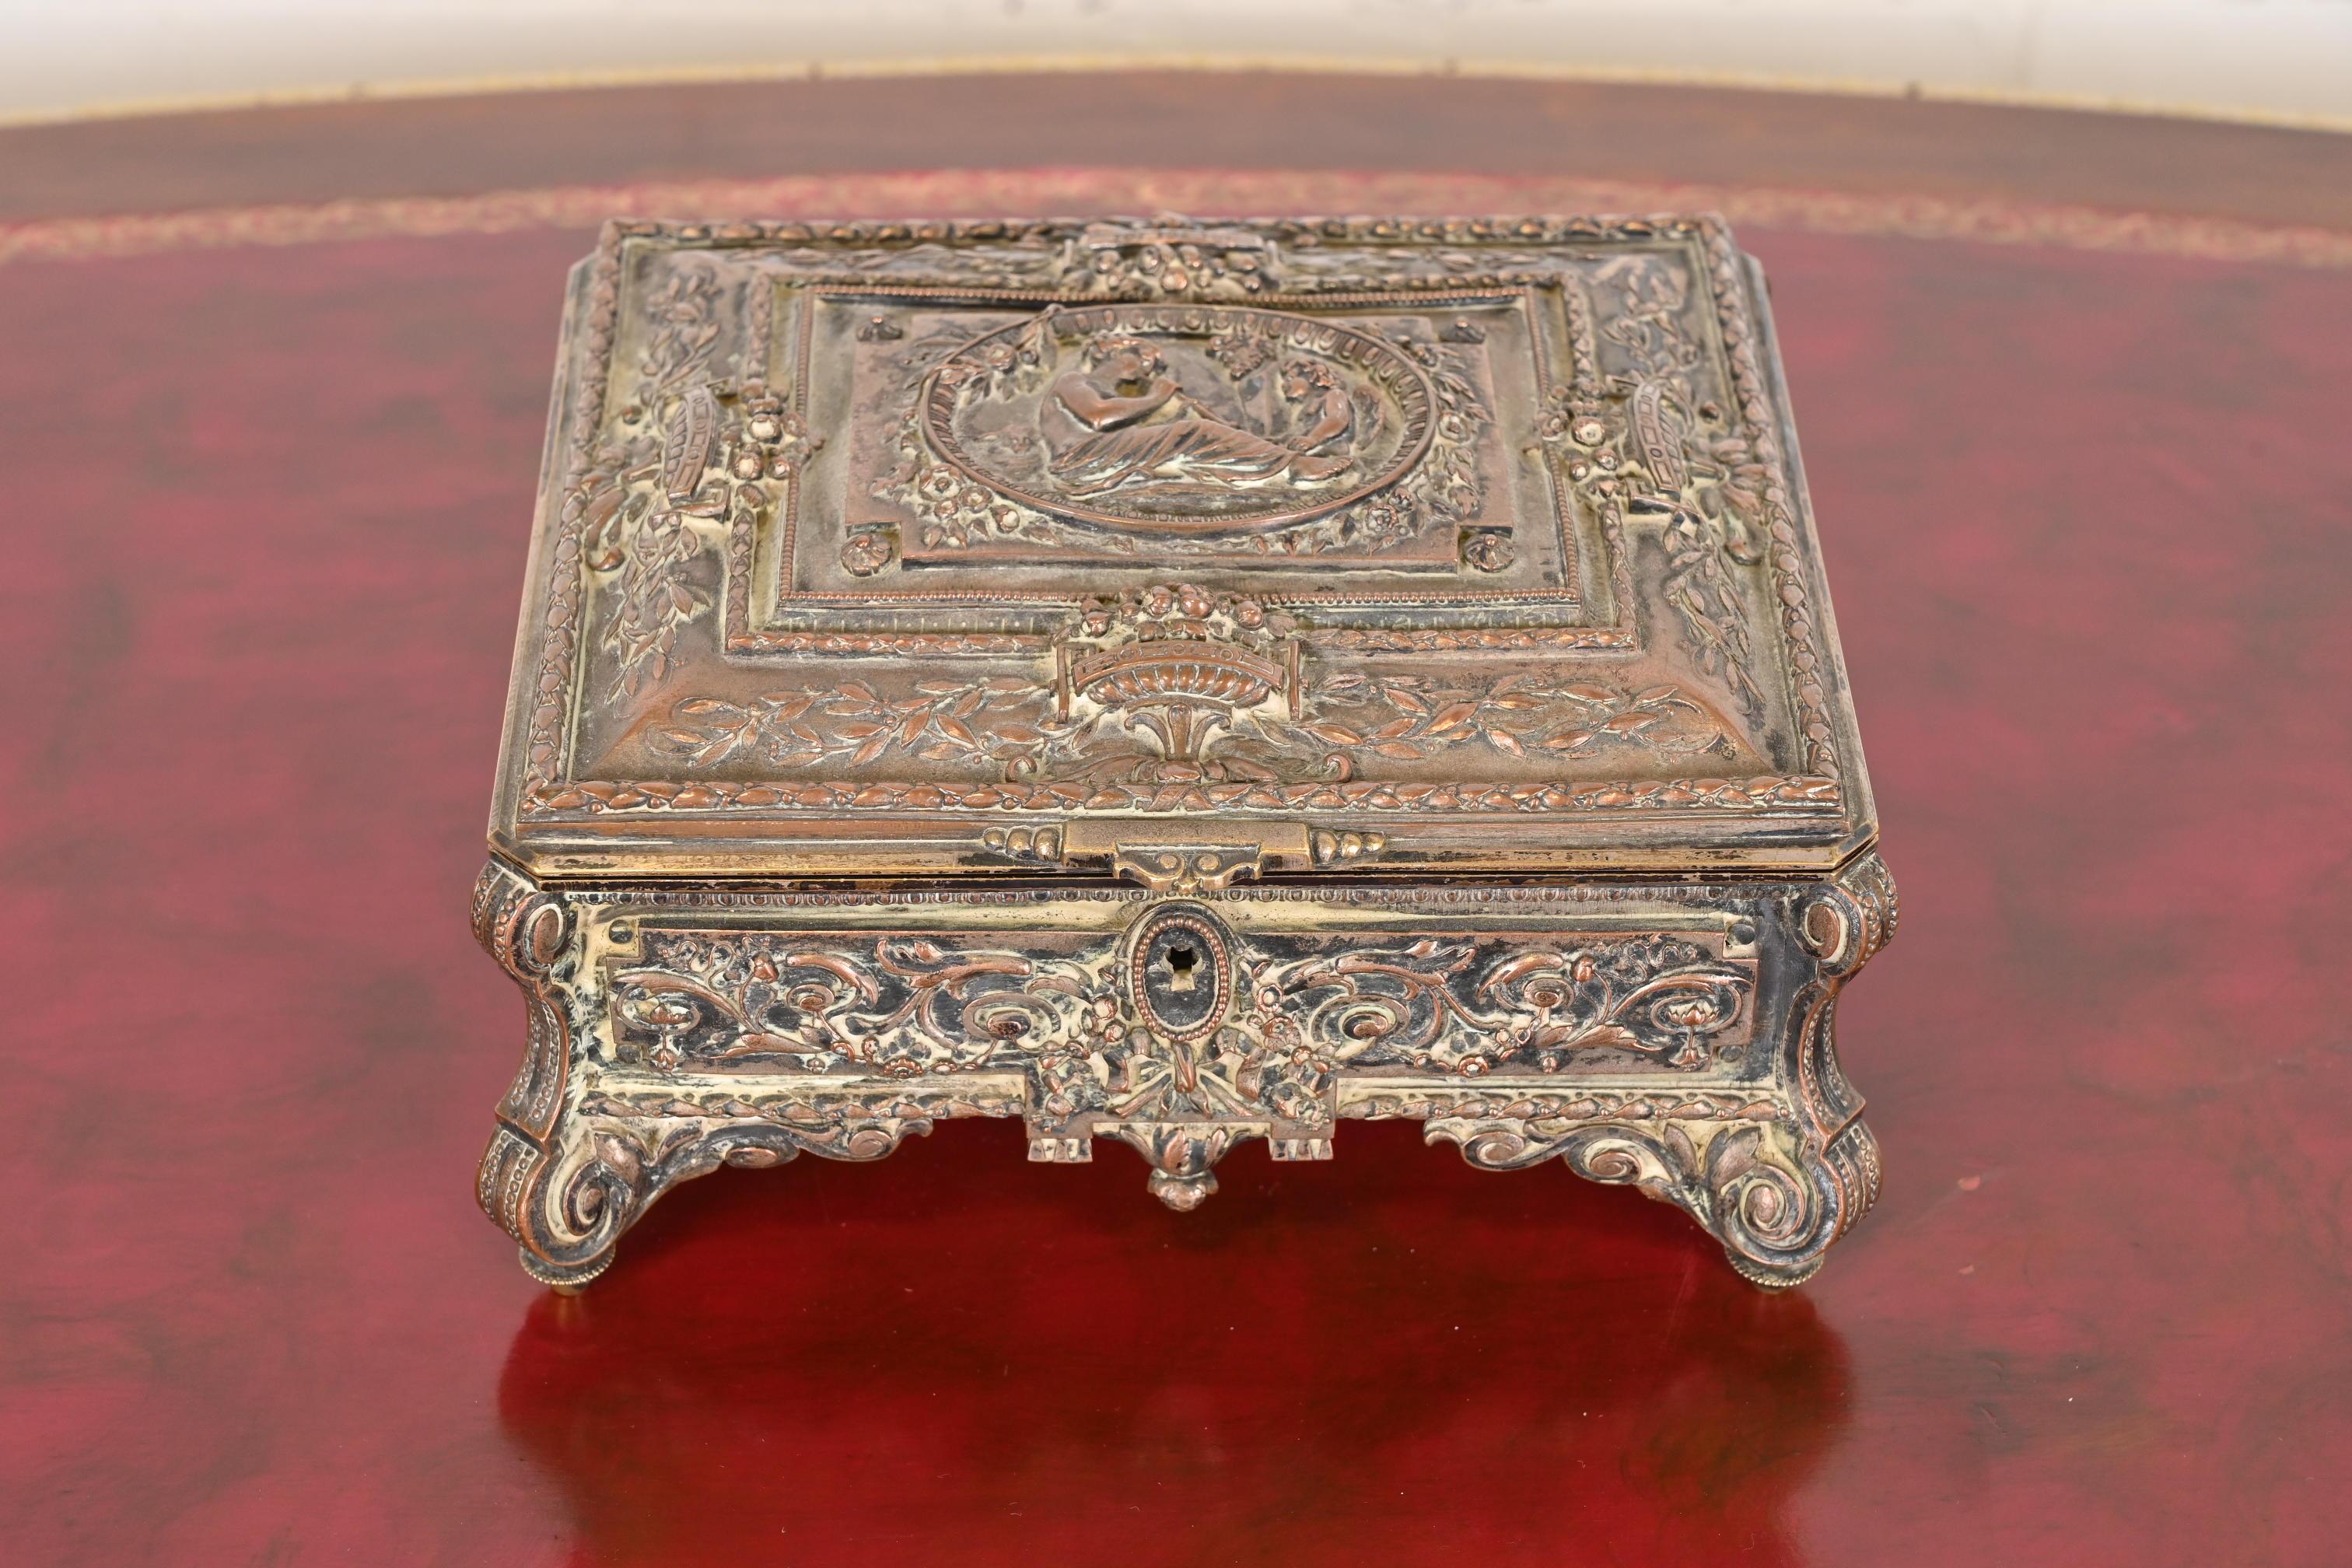 A gorgeous antique French Repousse dresser box, jewelry box, or decorative box

France, Circa Late 19th Century

Silver over bronze, with purple silk interior.

Measures: 7.75